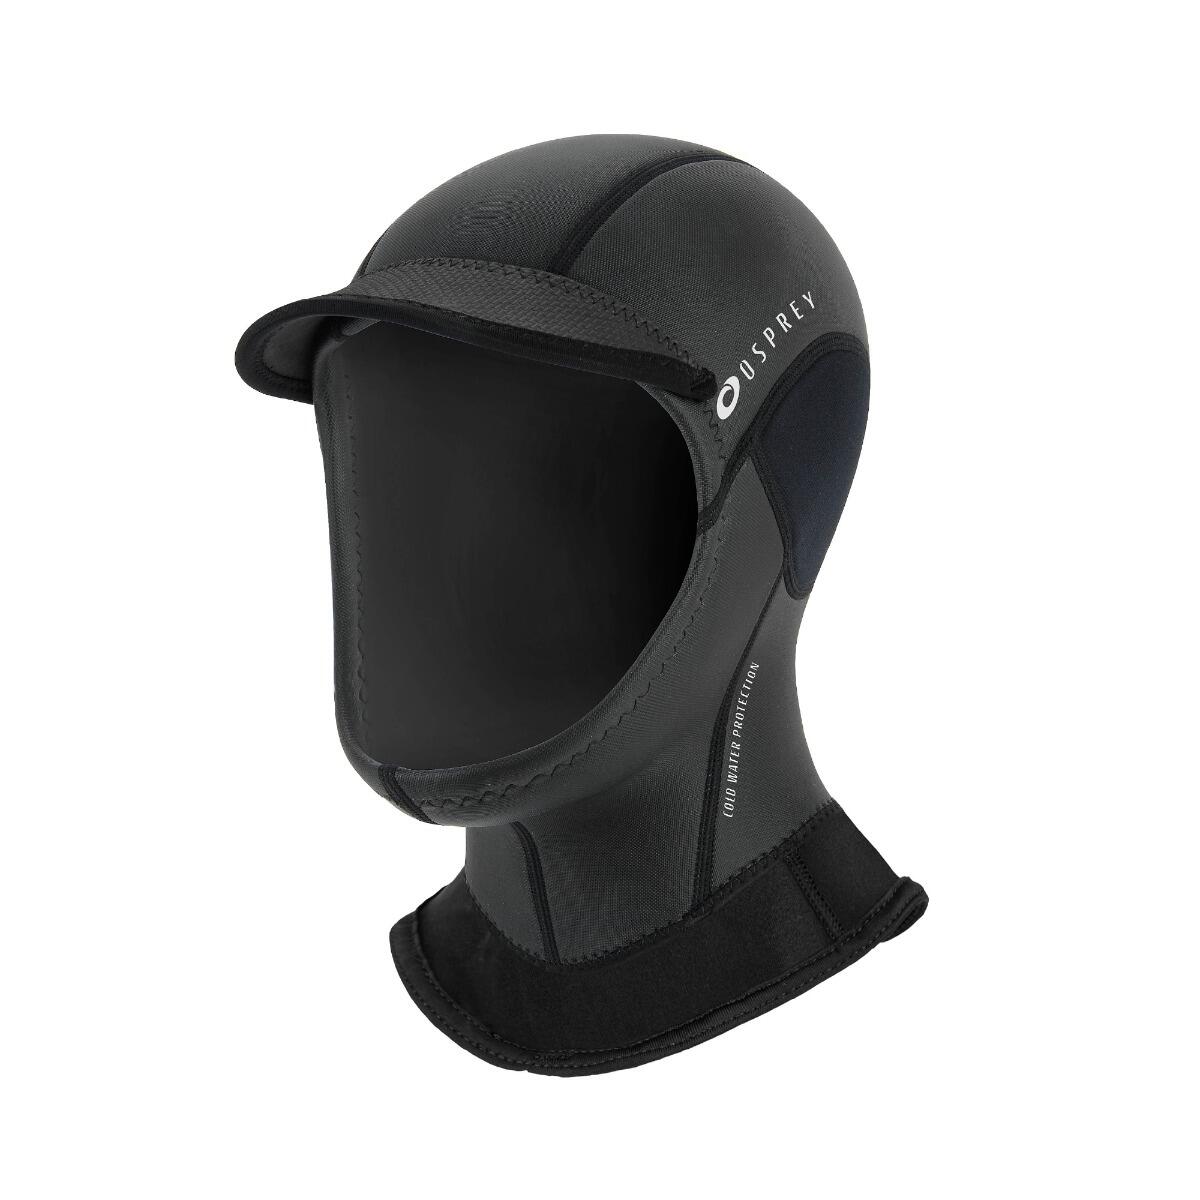 OSPREY ACTION SPORTS Osprey Wetsuit Hood 2mm Neoprene Thermal Diving Hood for Watersports